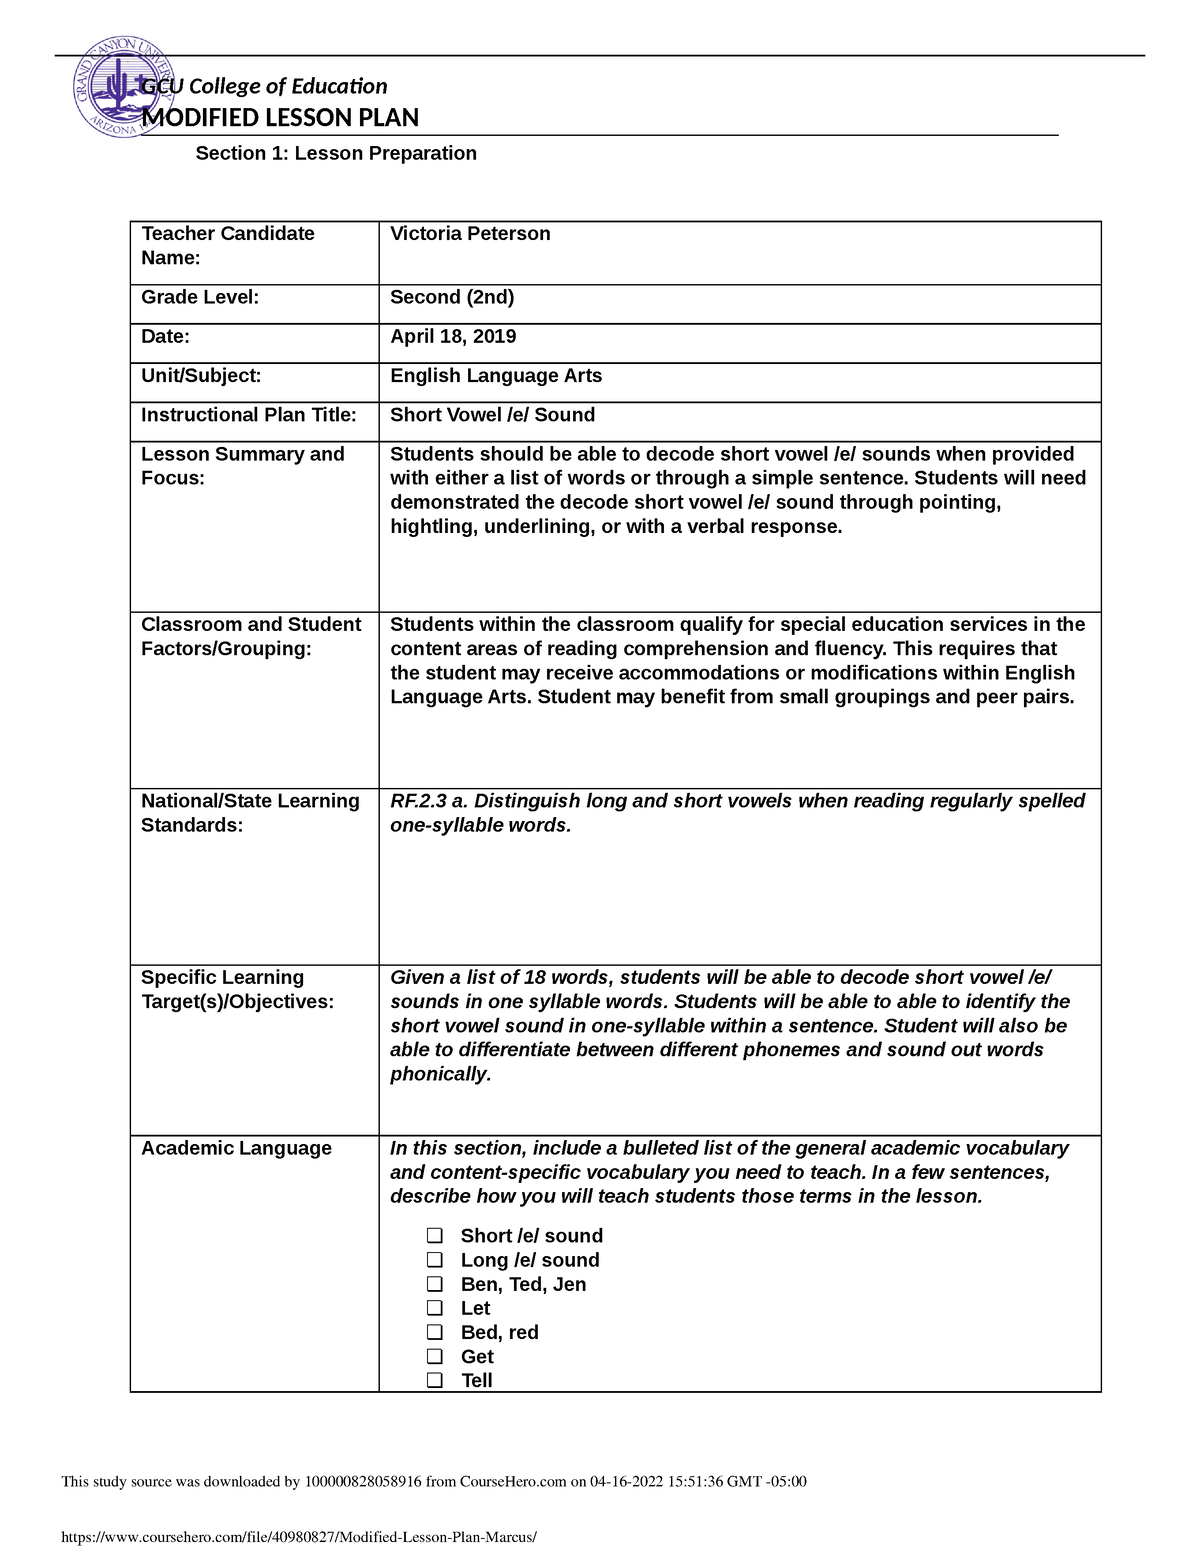 Modified Lesson Plan Marcus - MODIFIED LESSON PLAN Section 1: Lesson ...